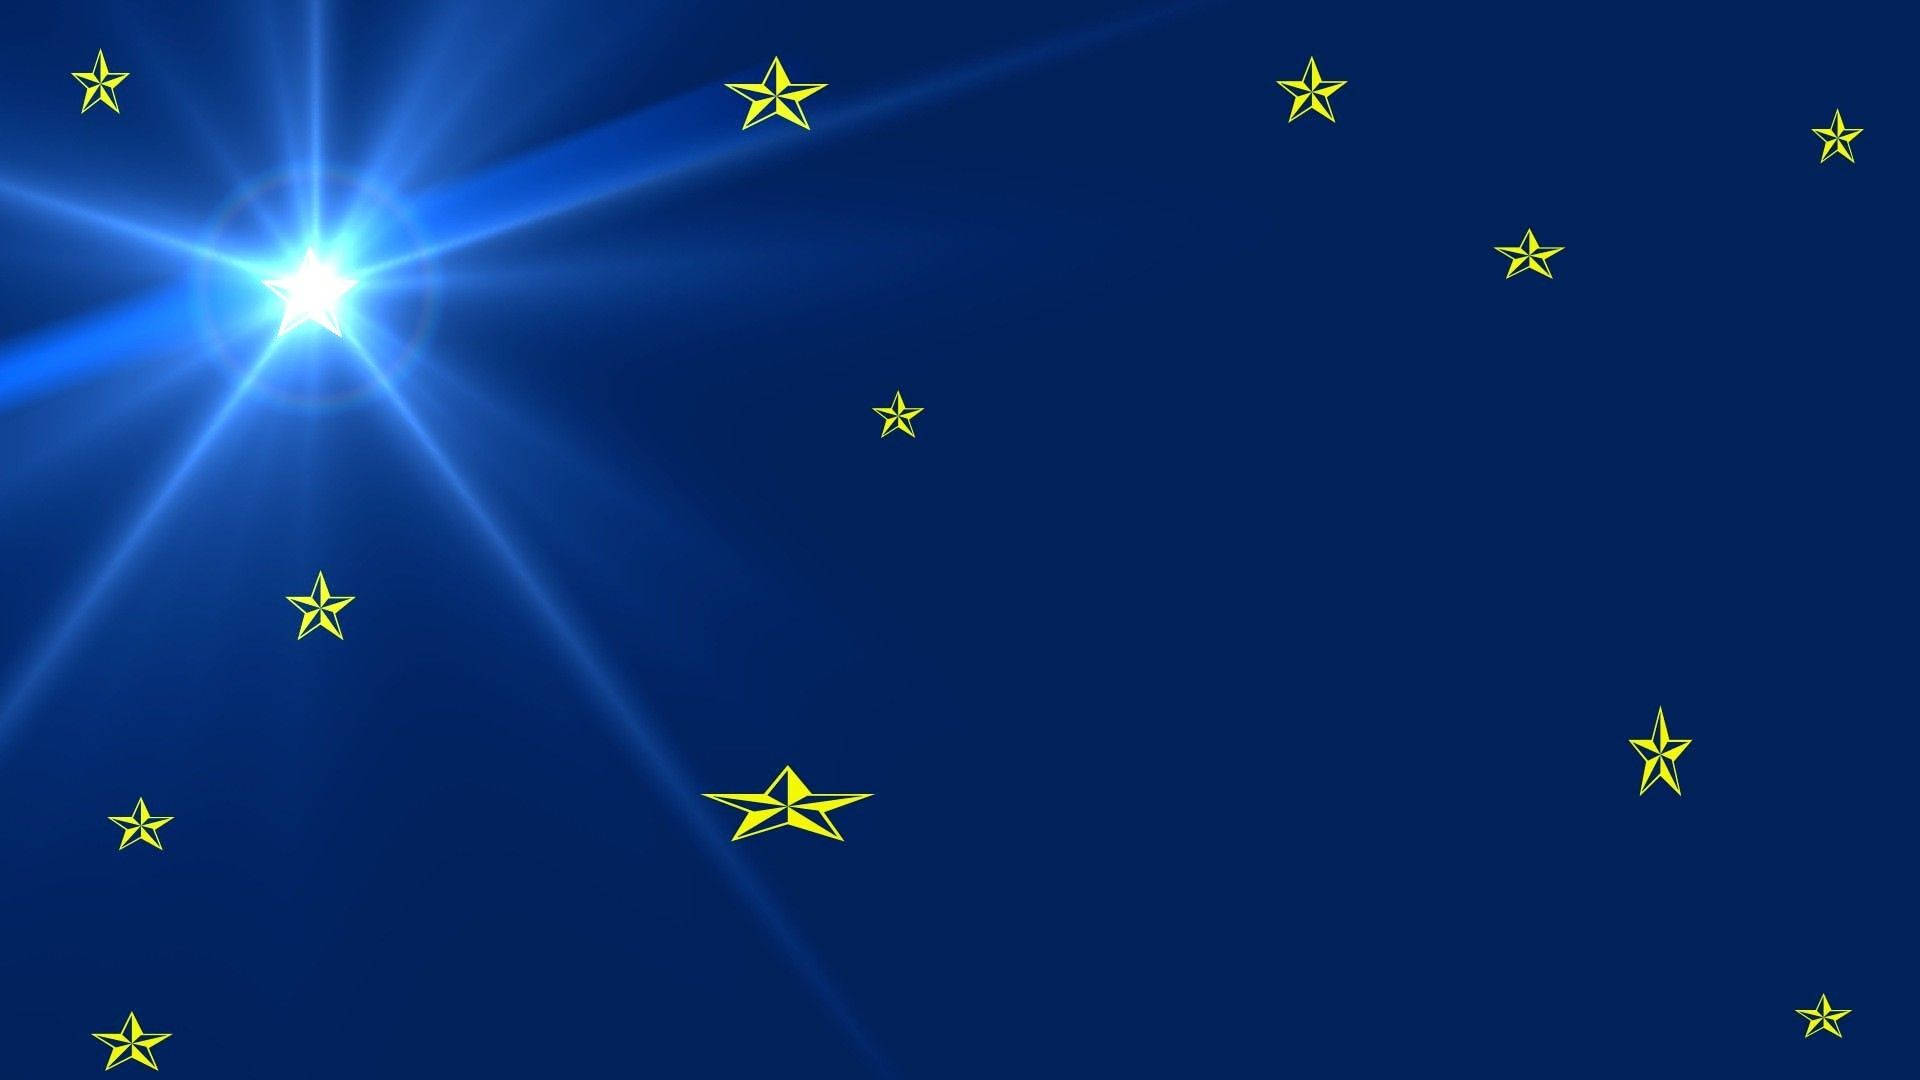 Blue And Gold Star Light Background